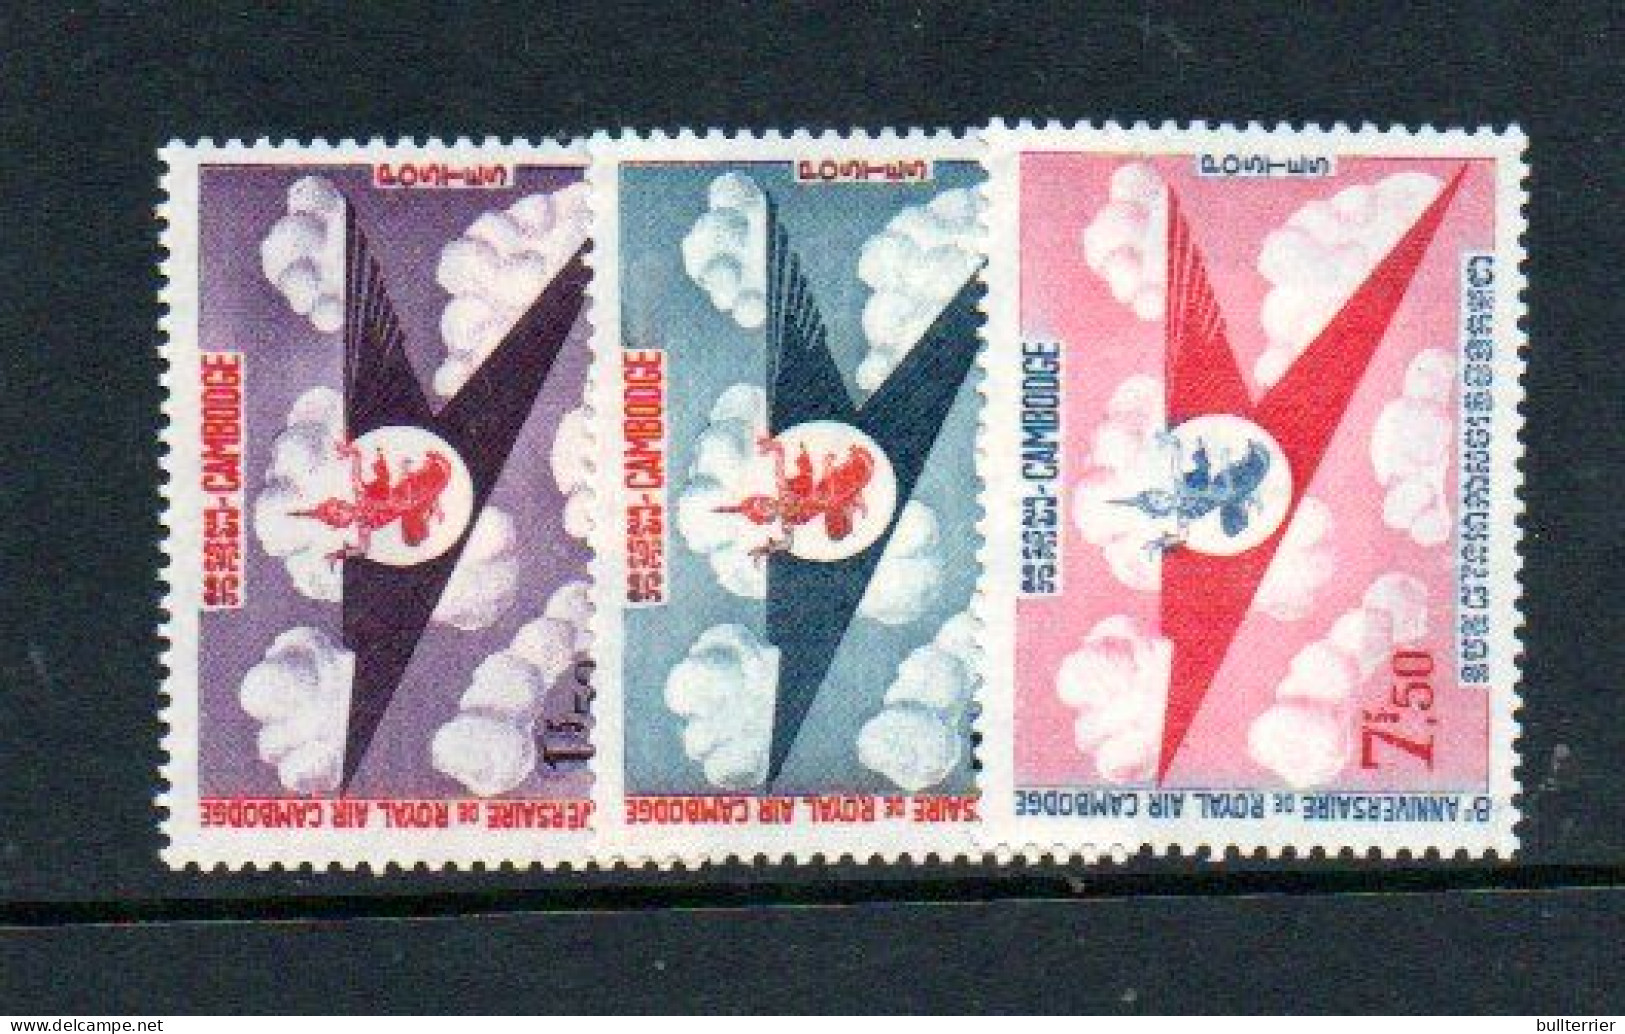 CAMBODIA - 1964- CAMBODIAN ROYAL AIR FORCE SET OF 3  MINT NEVER HINGED - Cambodia